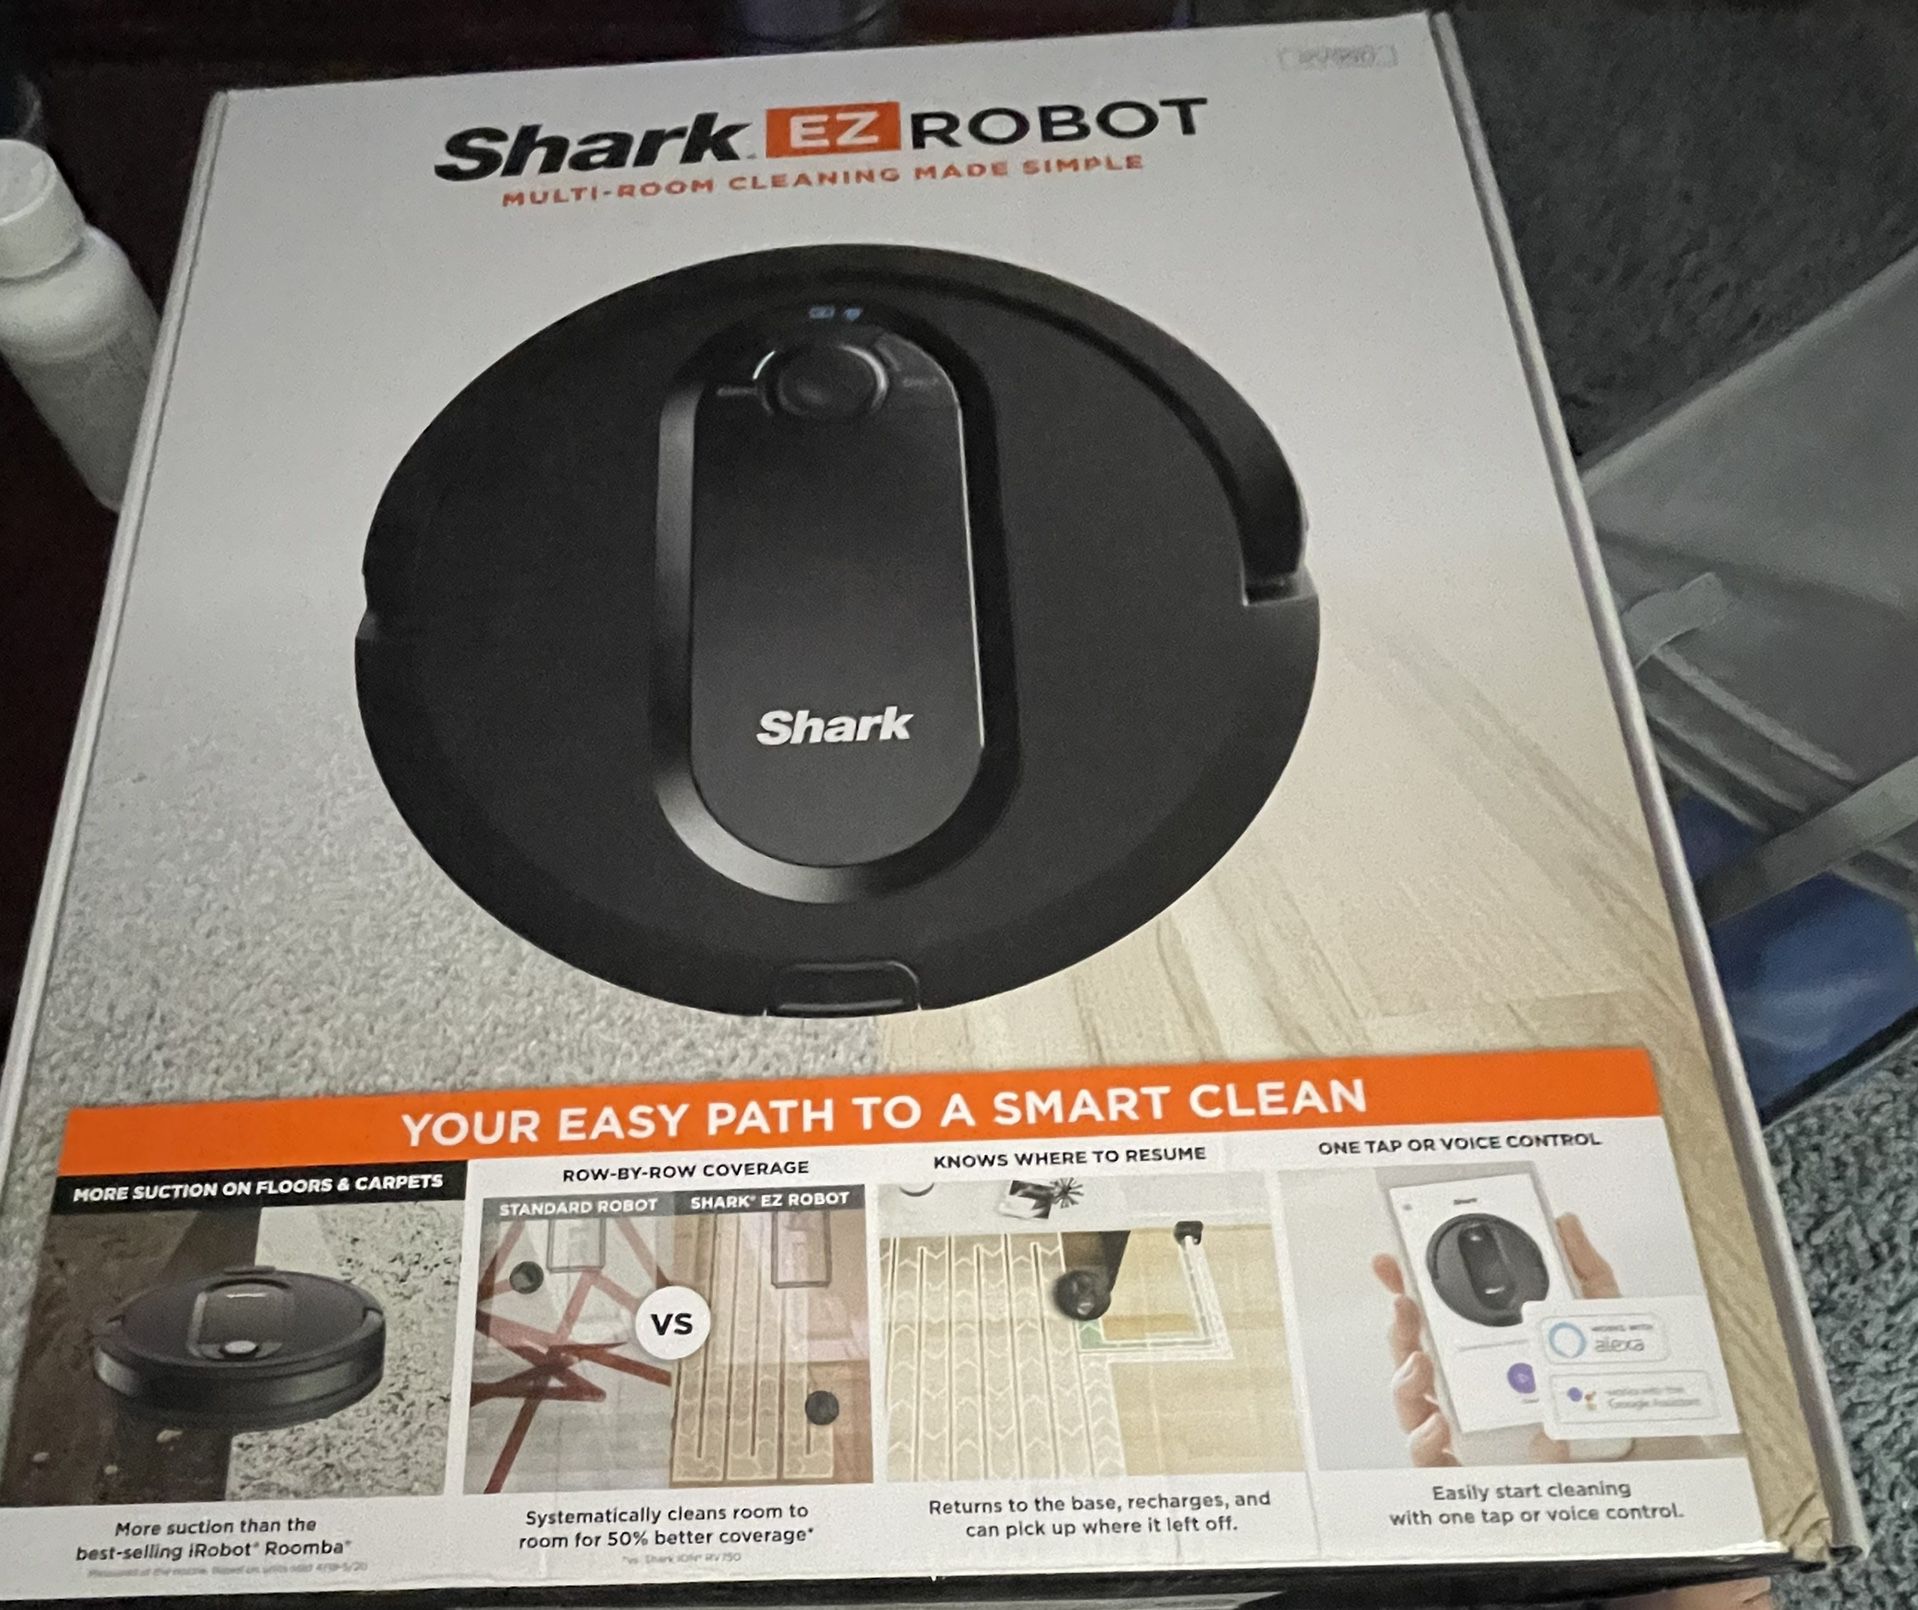 Shark EZ Robot Multi-Room Cleaning Made Simple 